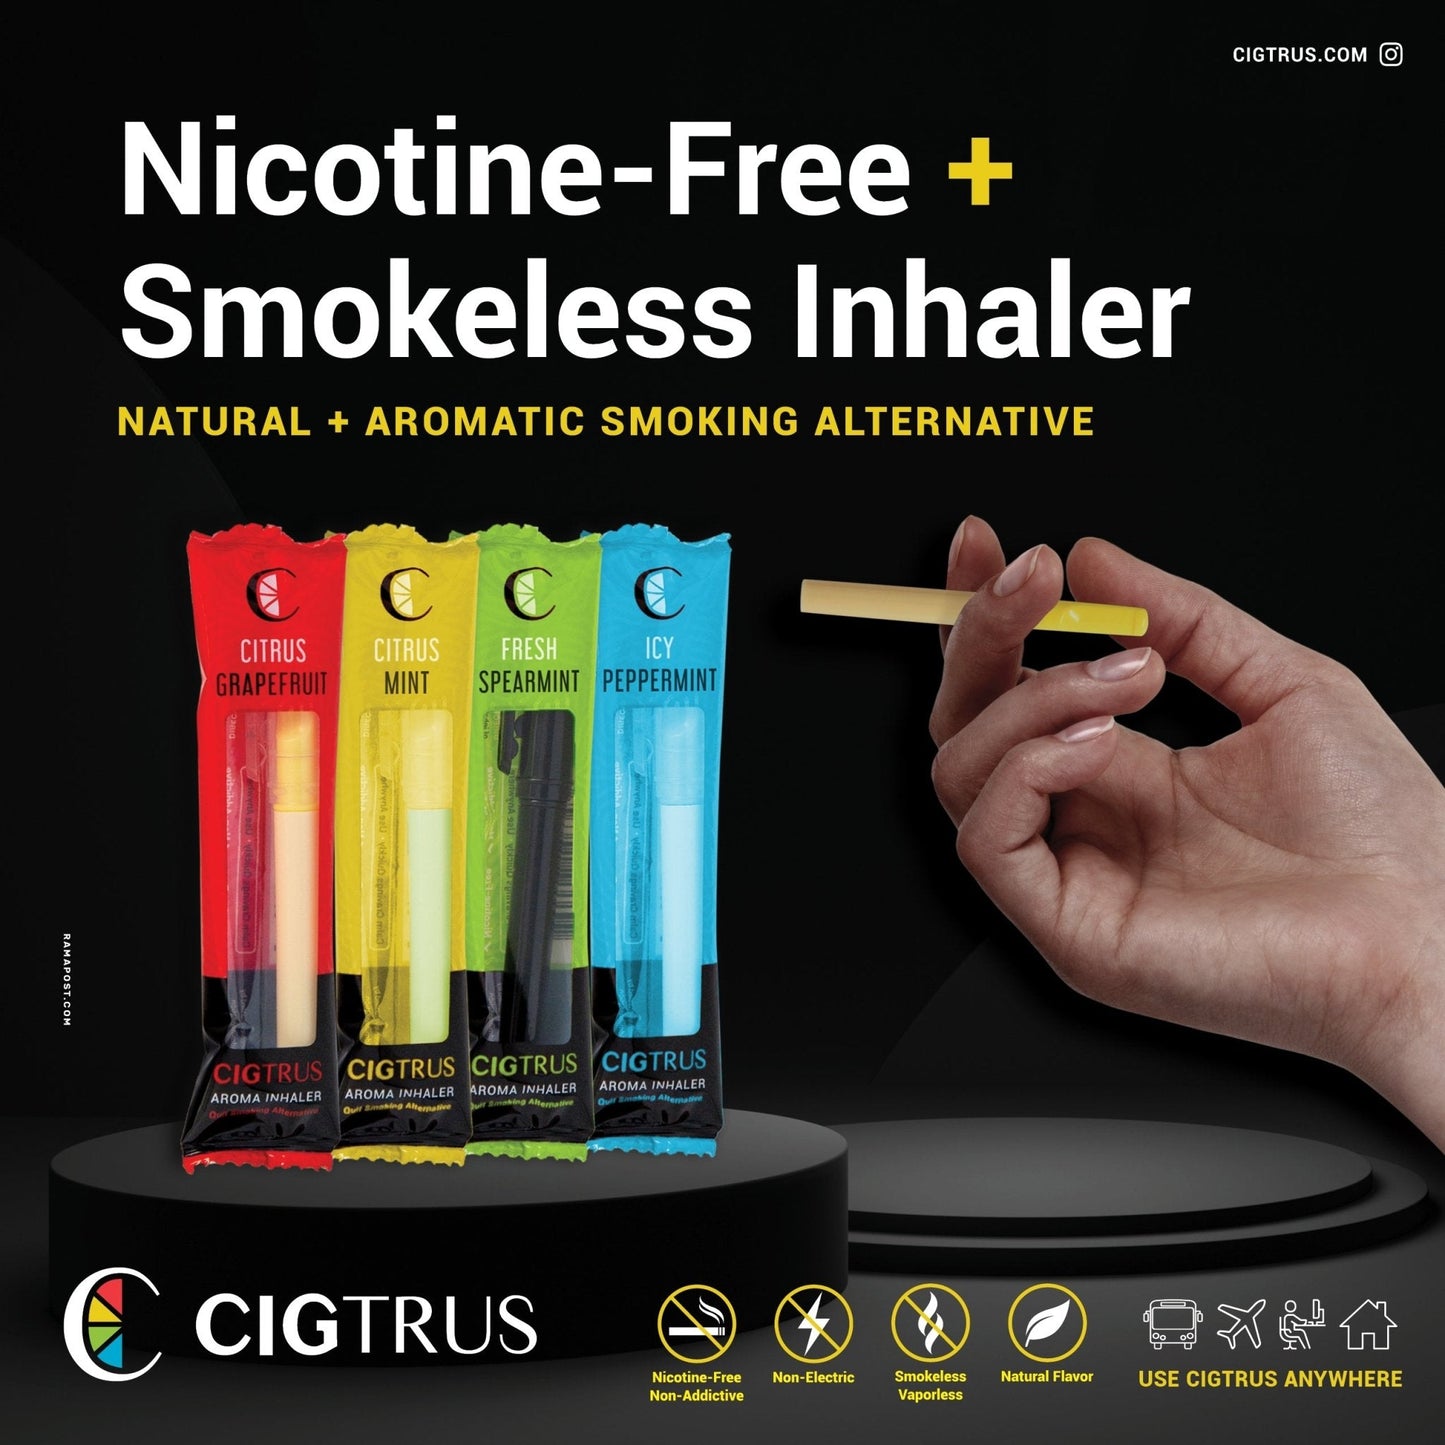 Cigtrus: Delicious & Refreshing Smokeless Nicotine-Free Flavored Air Puffer -  Kick the Habits and Satisfy Oral Fixation, and Cravings Relief 4 Flavor Sample Pack